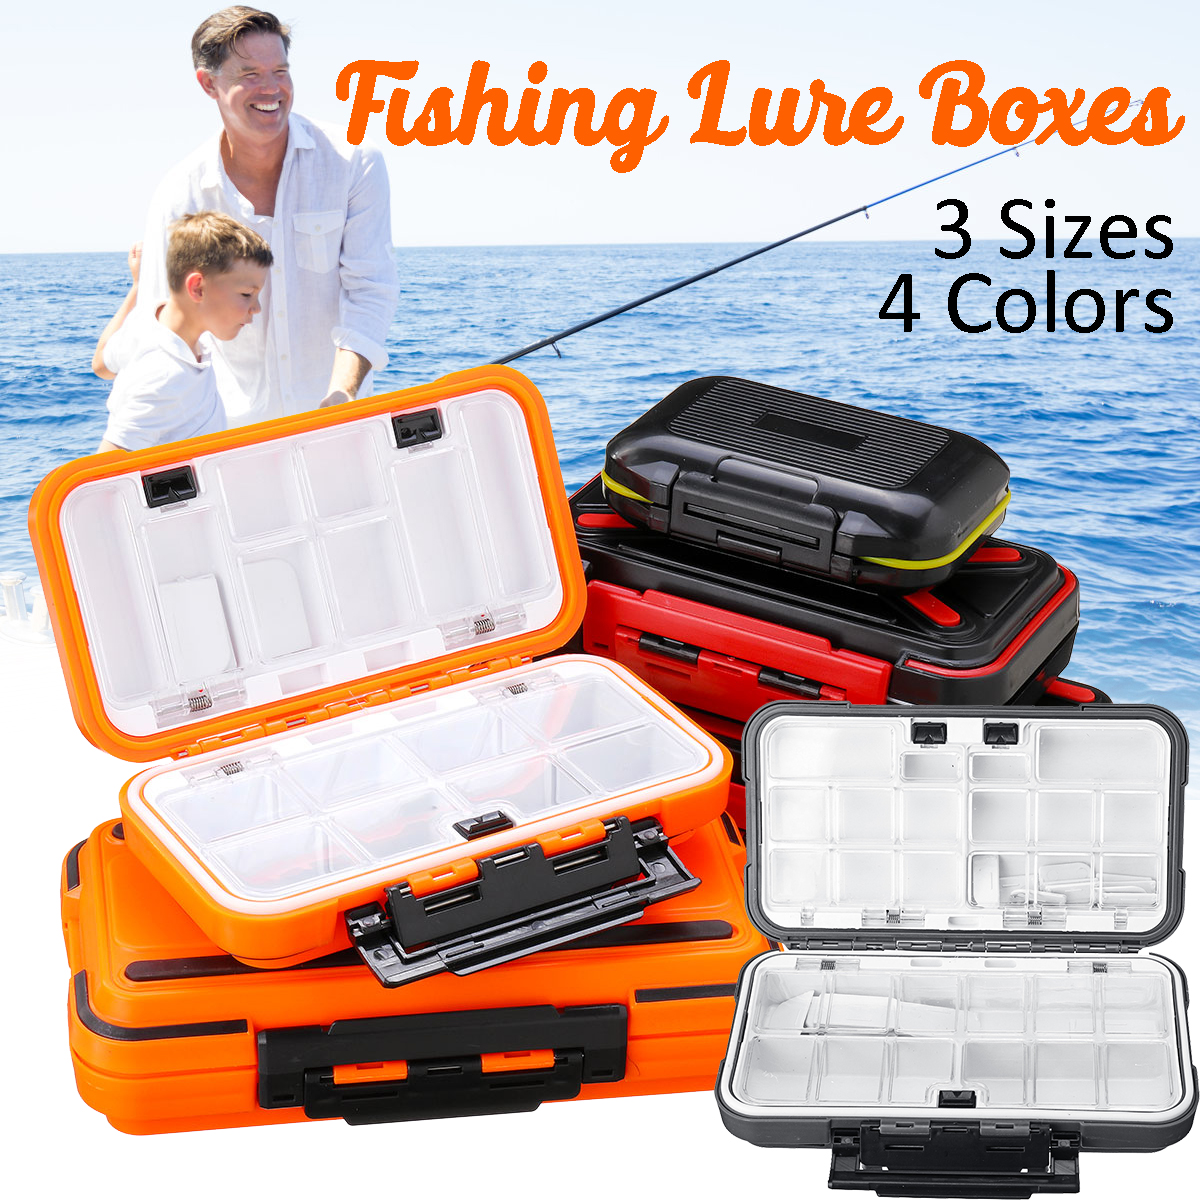 Waterproof-Fishing-Lure-Storage-Case-Double-Side-Sea-Boat-Distance-Carp-Fly-Tackle-Box-1809116-1